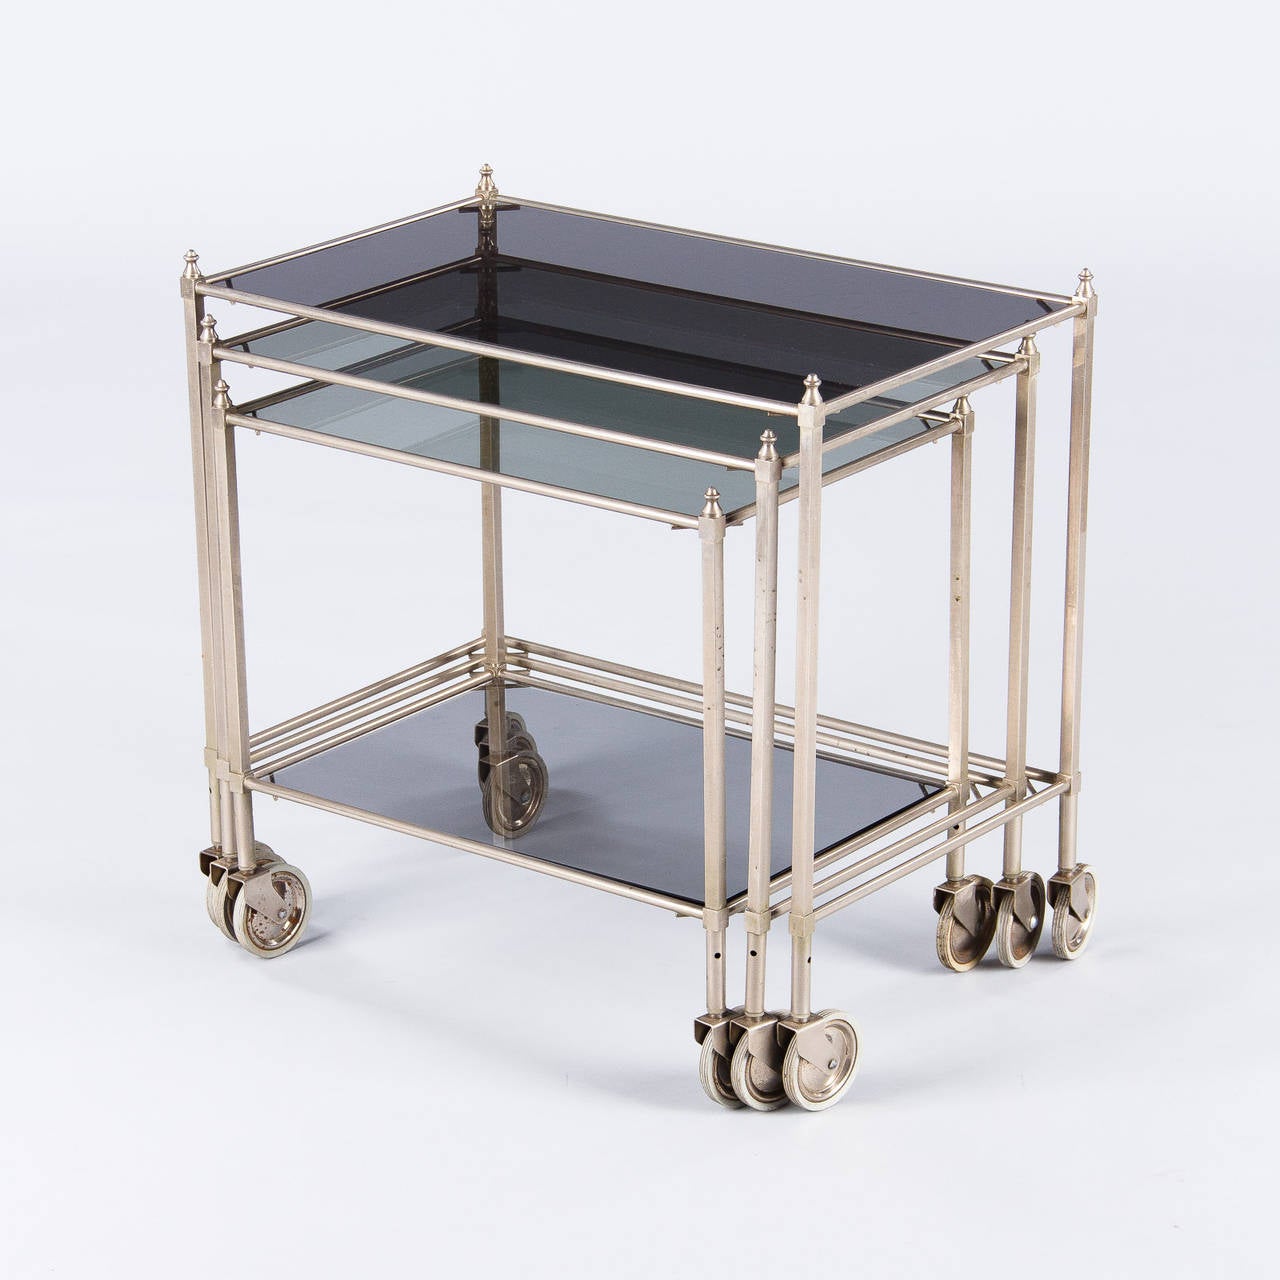 Modern Set of Three Nickel Nesting Tables from Germany, 1970s